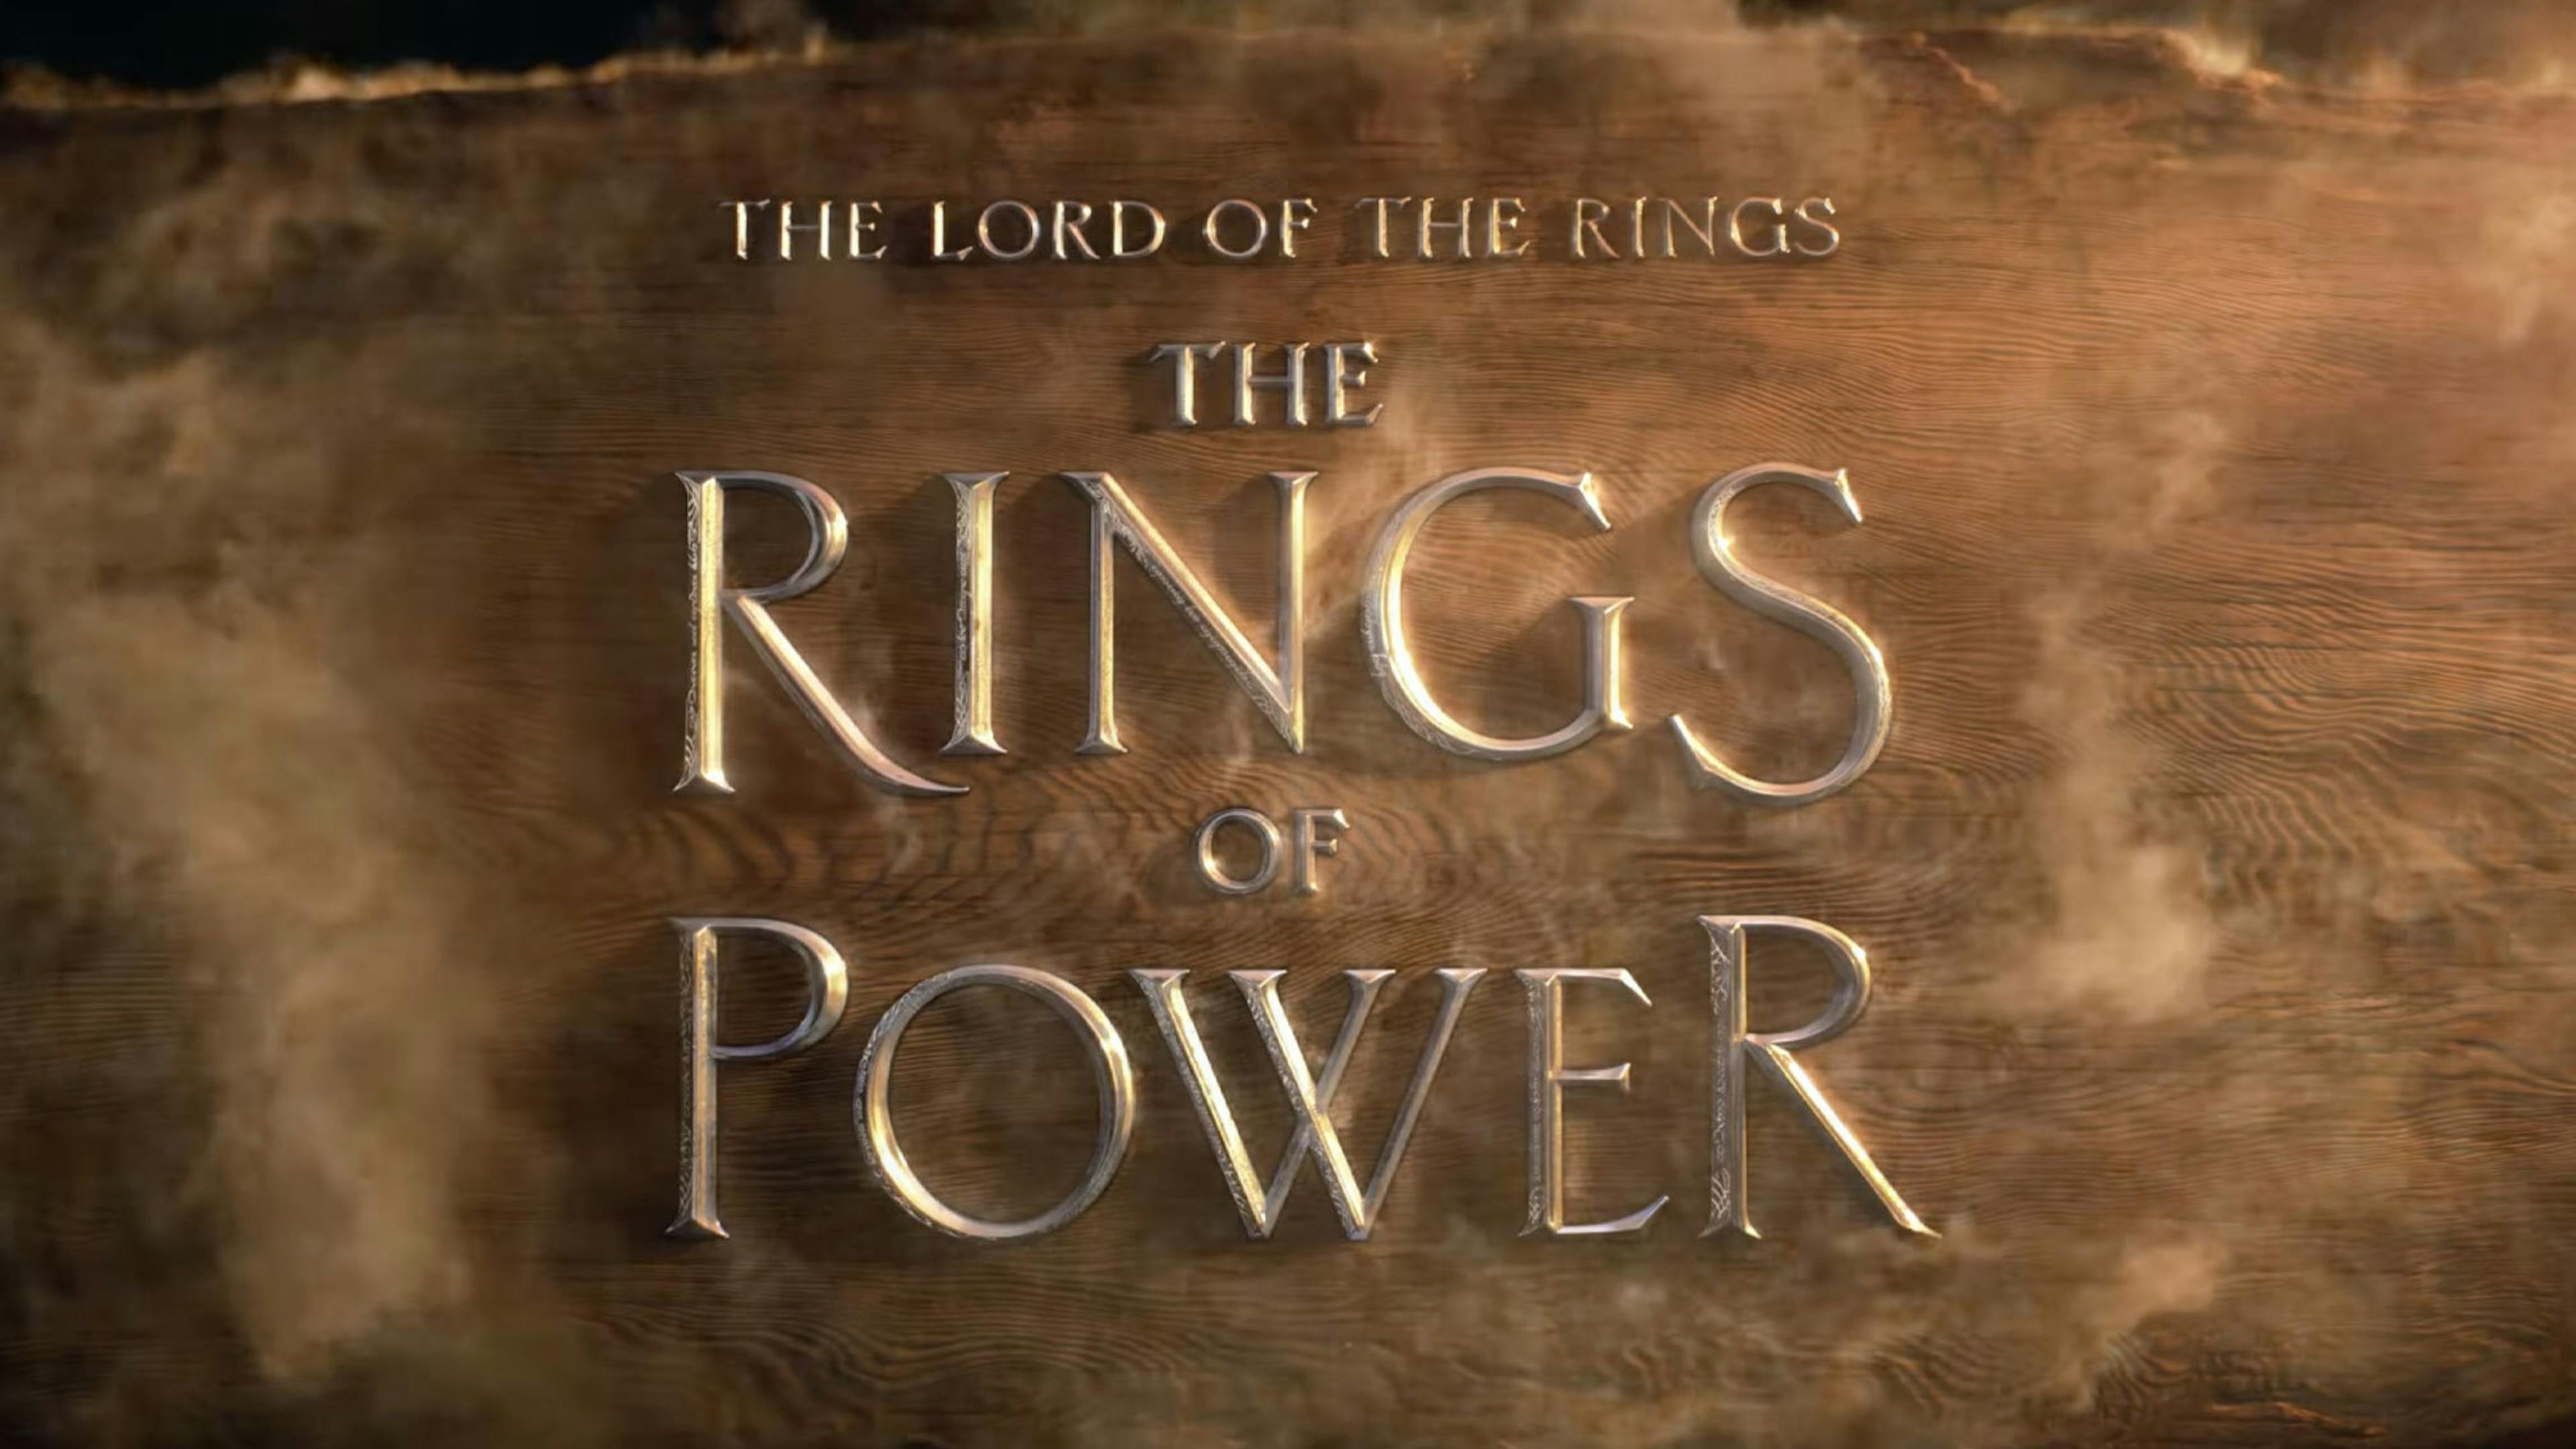 Amazon’s Lord Of The Rings TV series finally has a name: The Rings Of Power